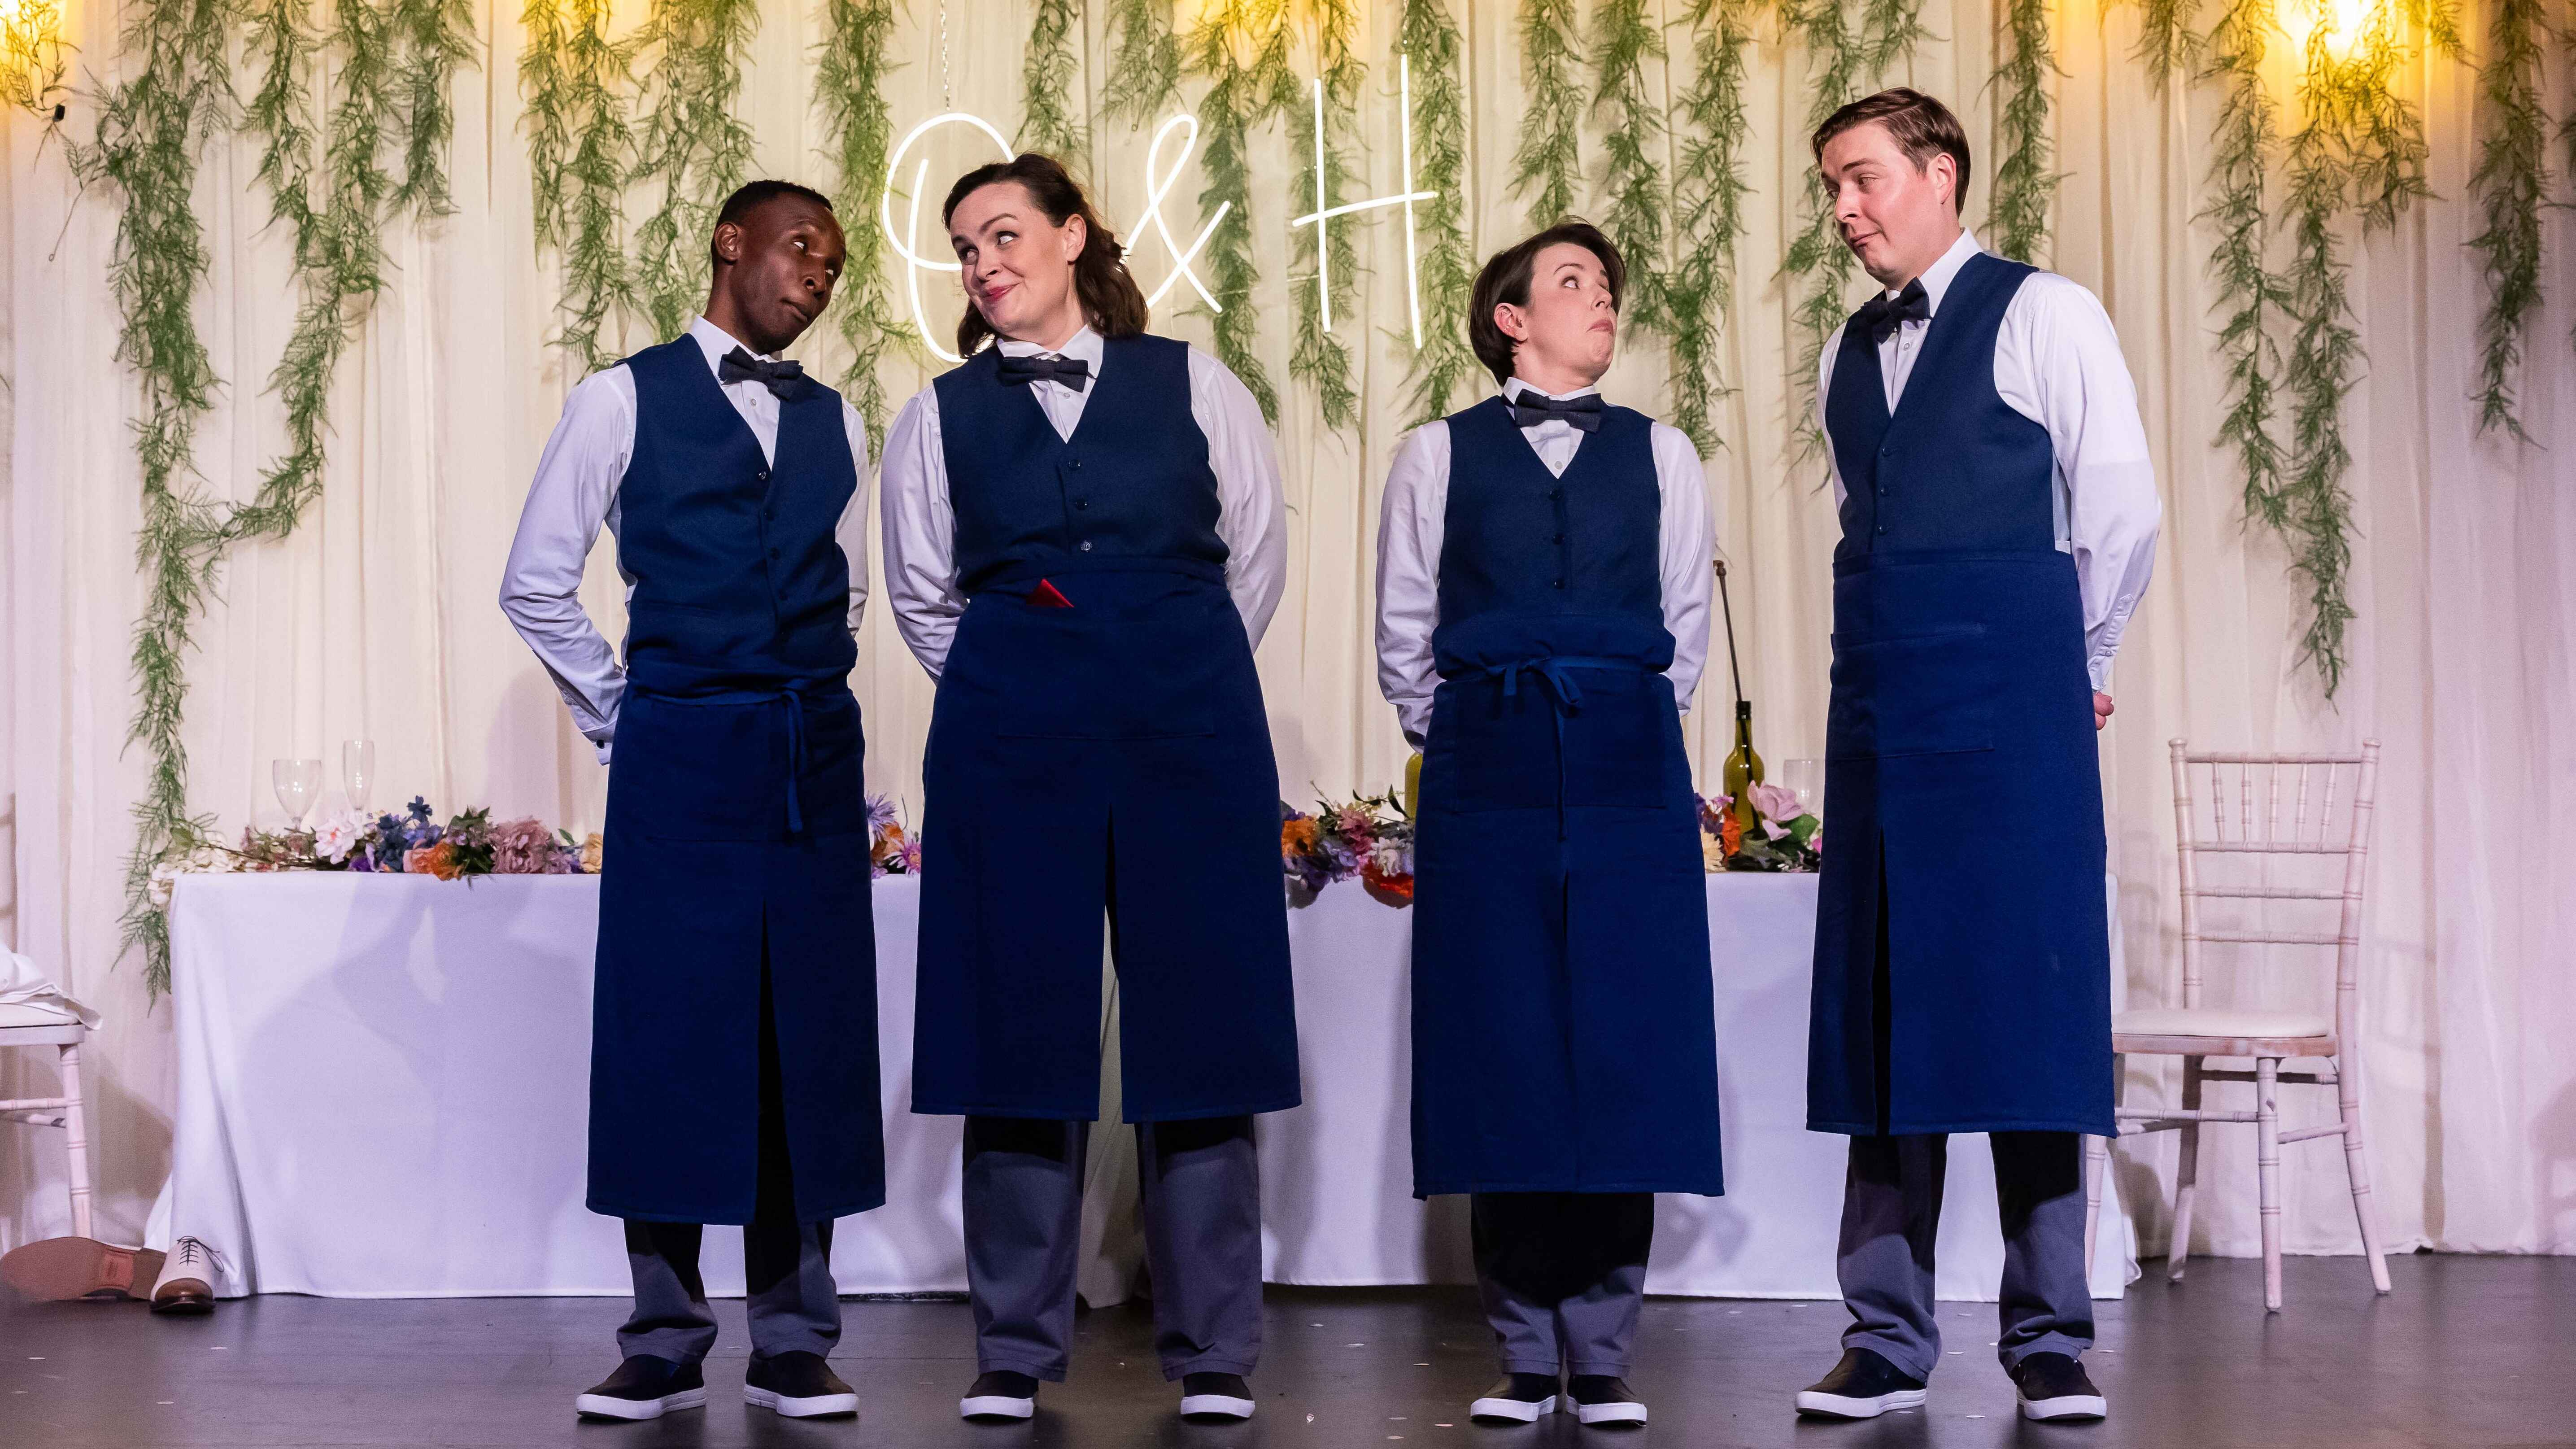 Four cast members dressed as waiters look at one another suspiciously.